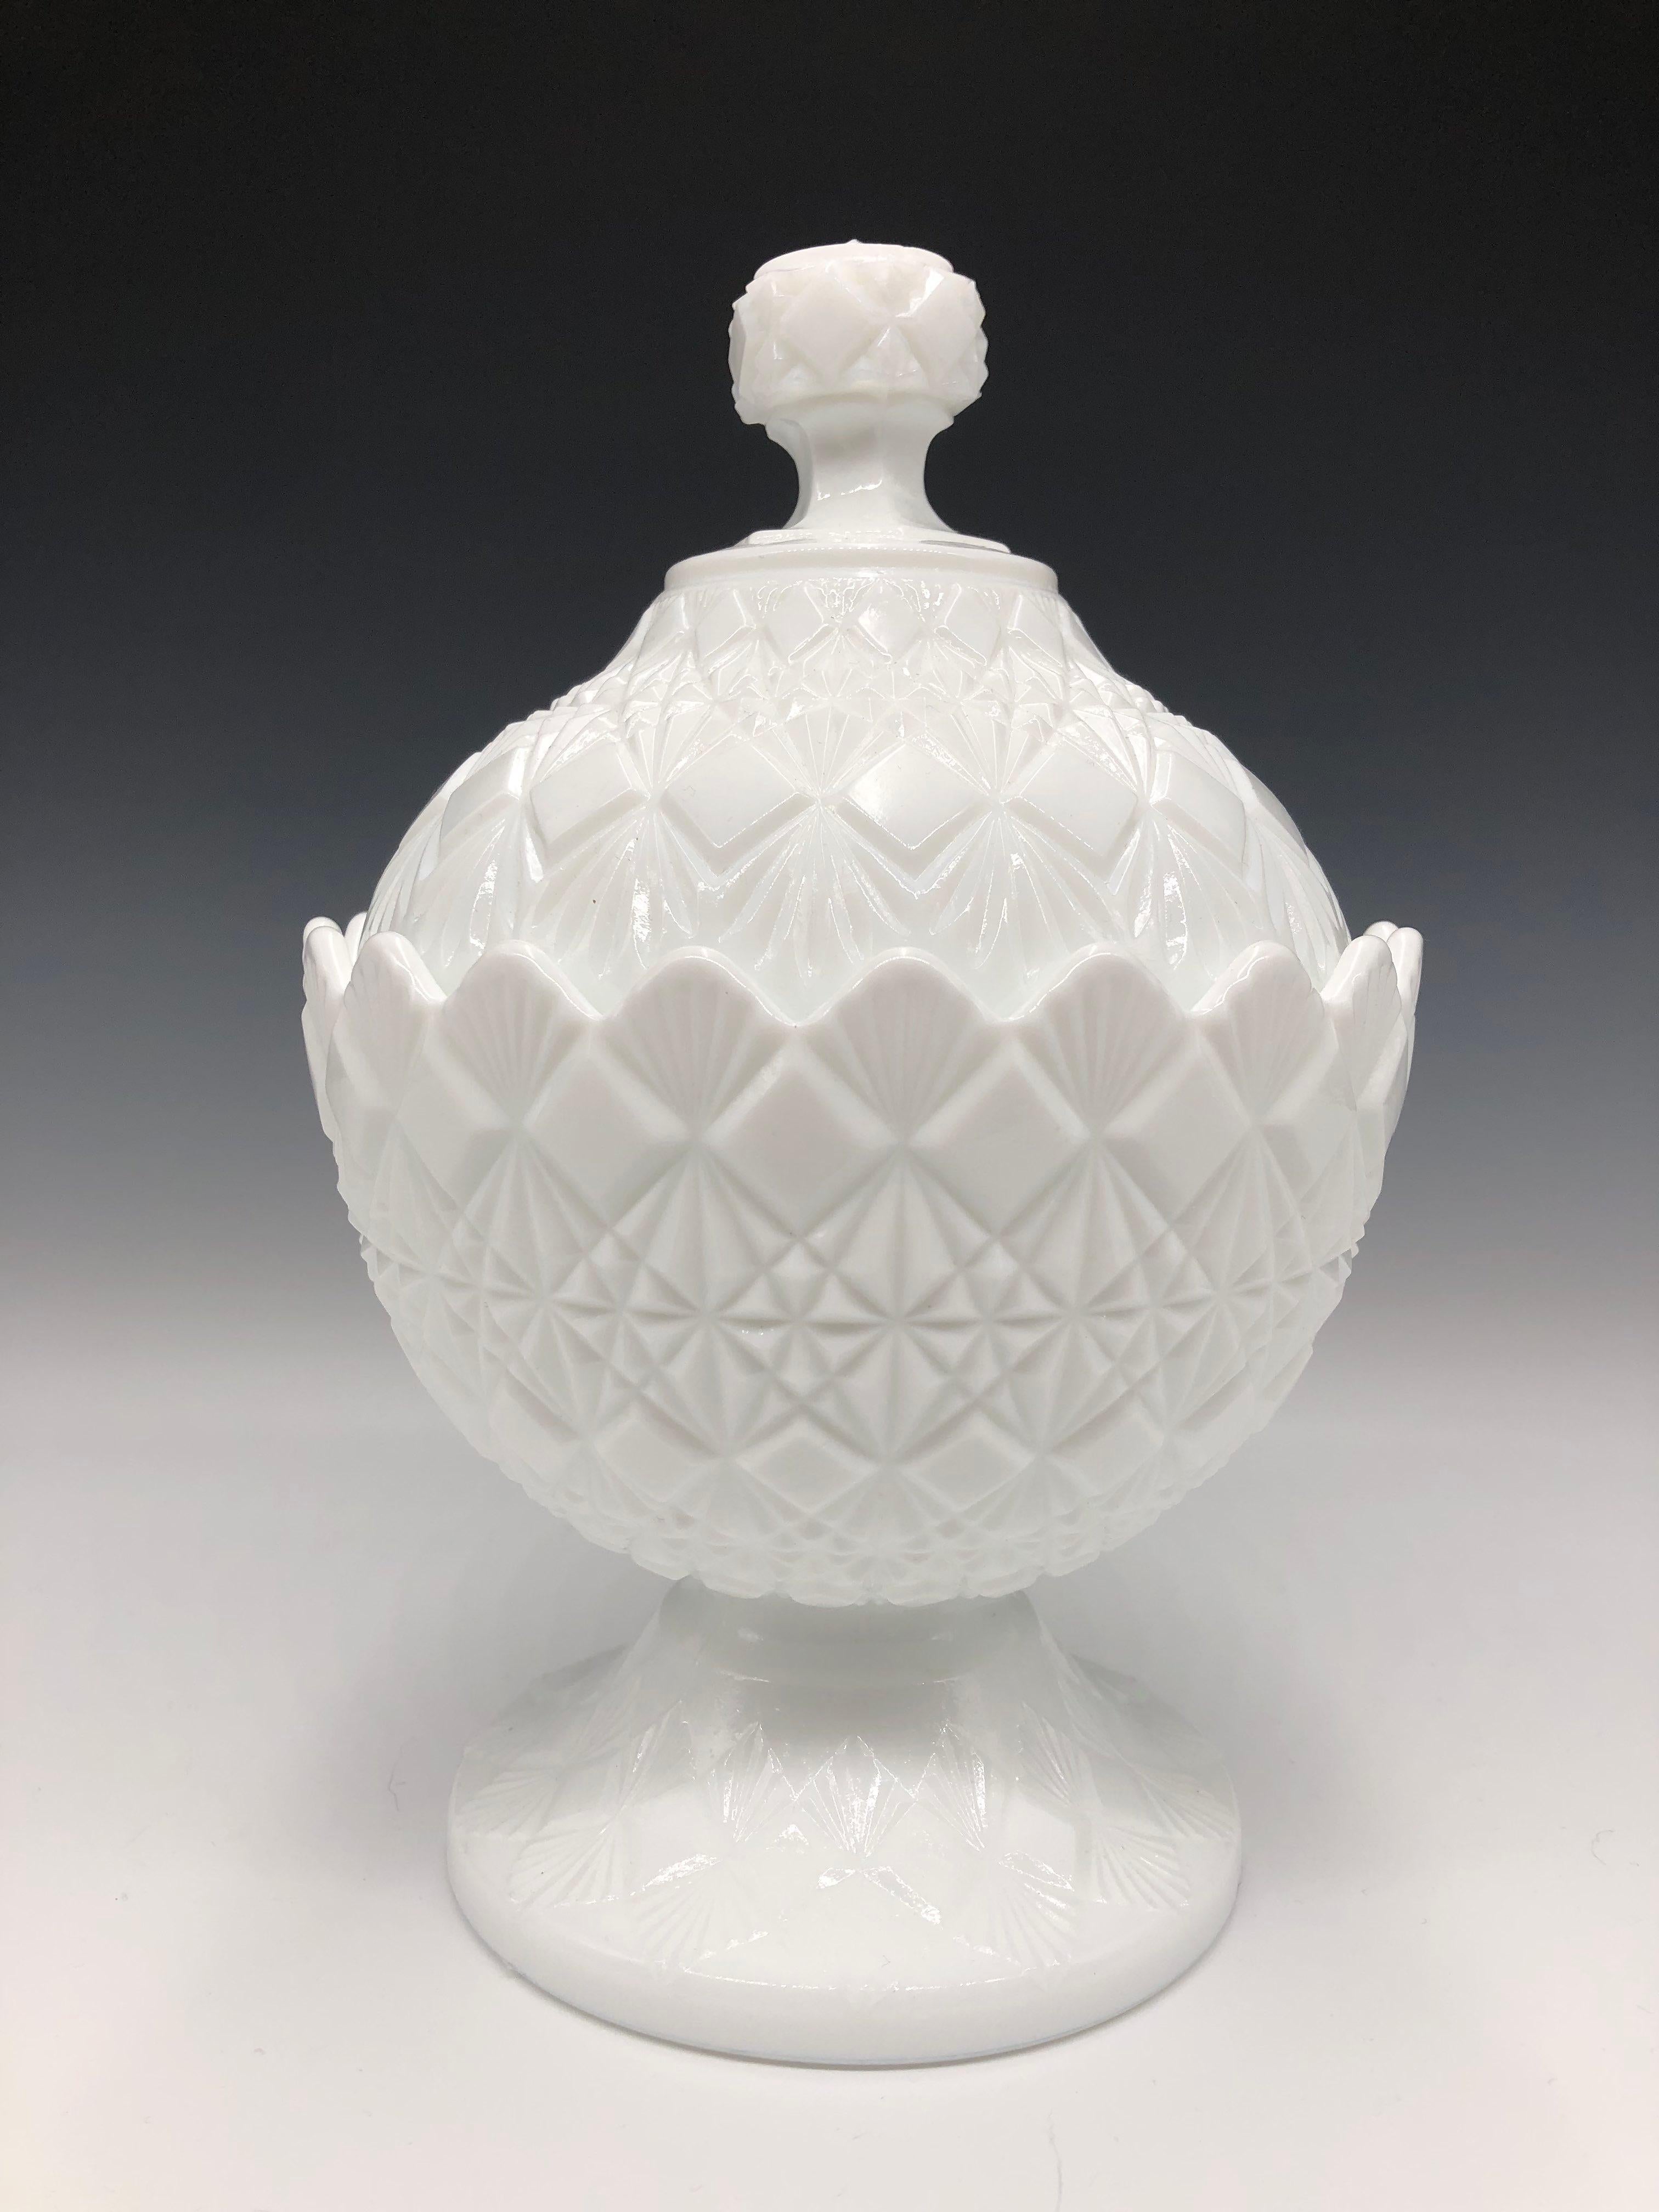 Unknown Abstract Sculpture - 1960s White Fenton Olde Virginia Glass Pedestal Candy Dish with Lid